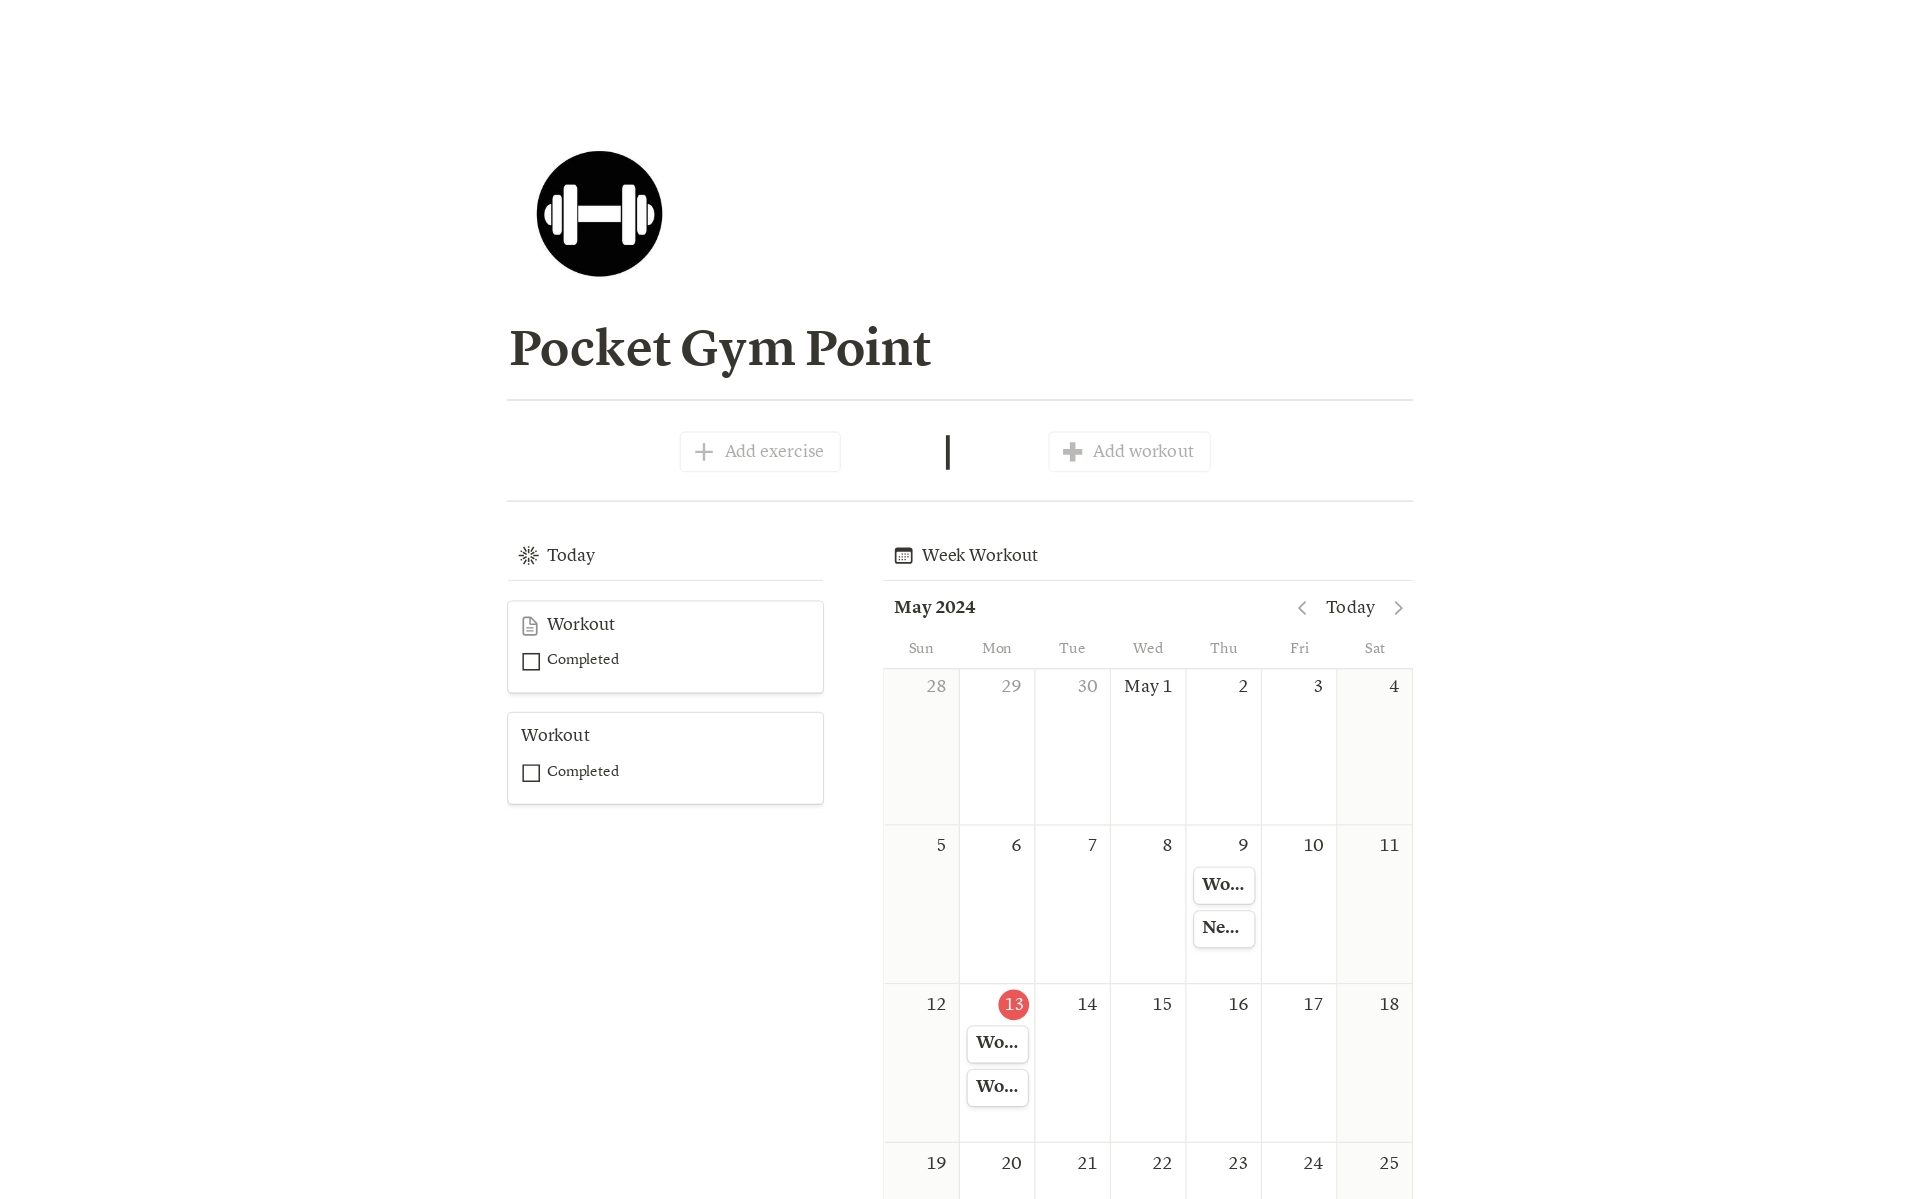 A simple and easy to use gym & workout planner. 
Health is the foundation of a fulfilling life. Build it here.